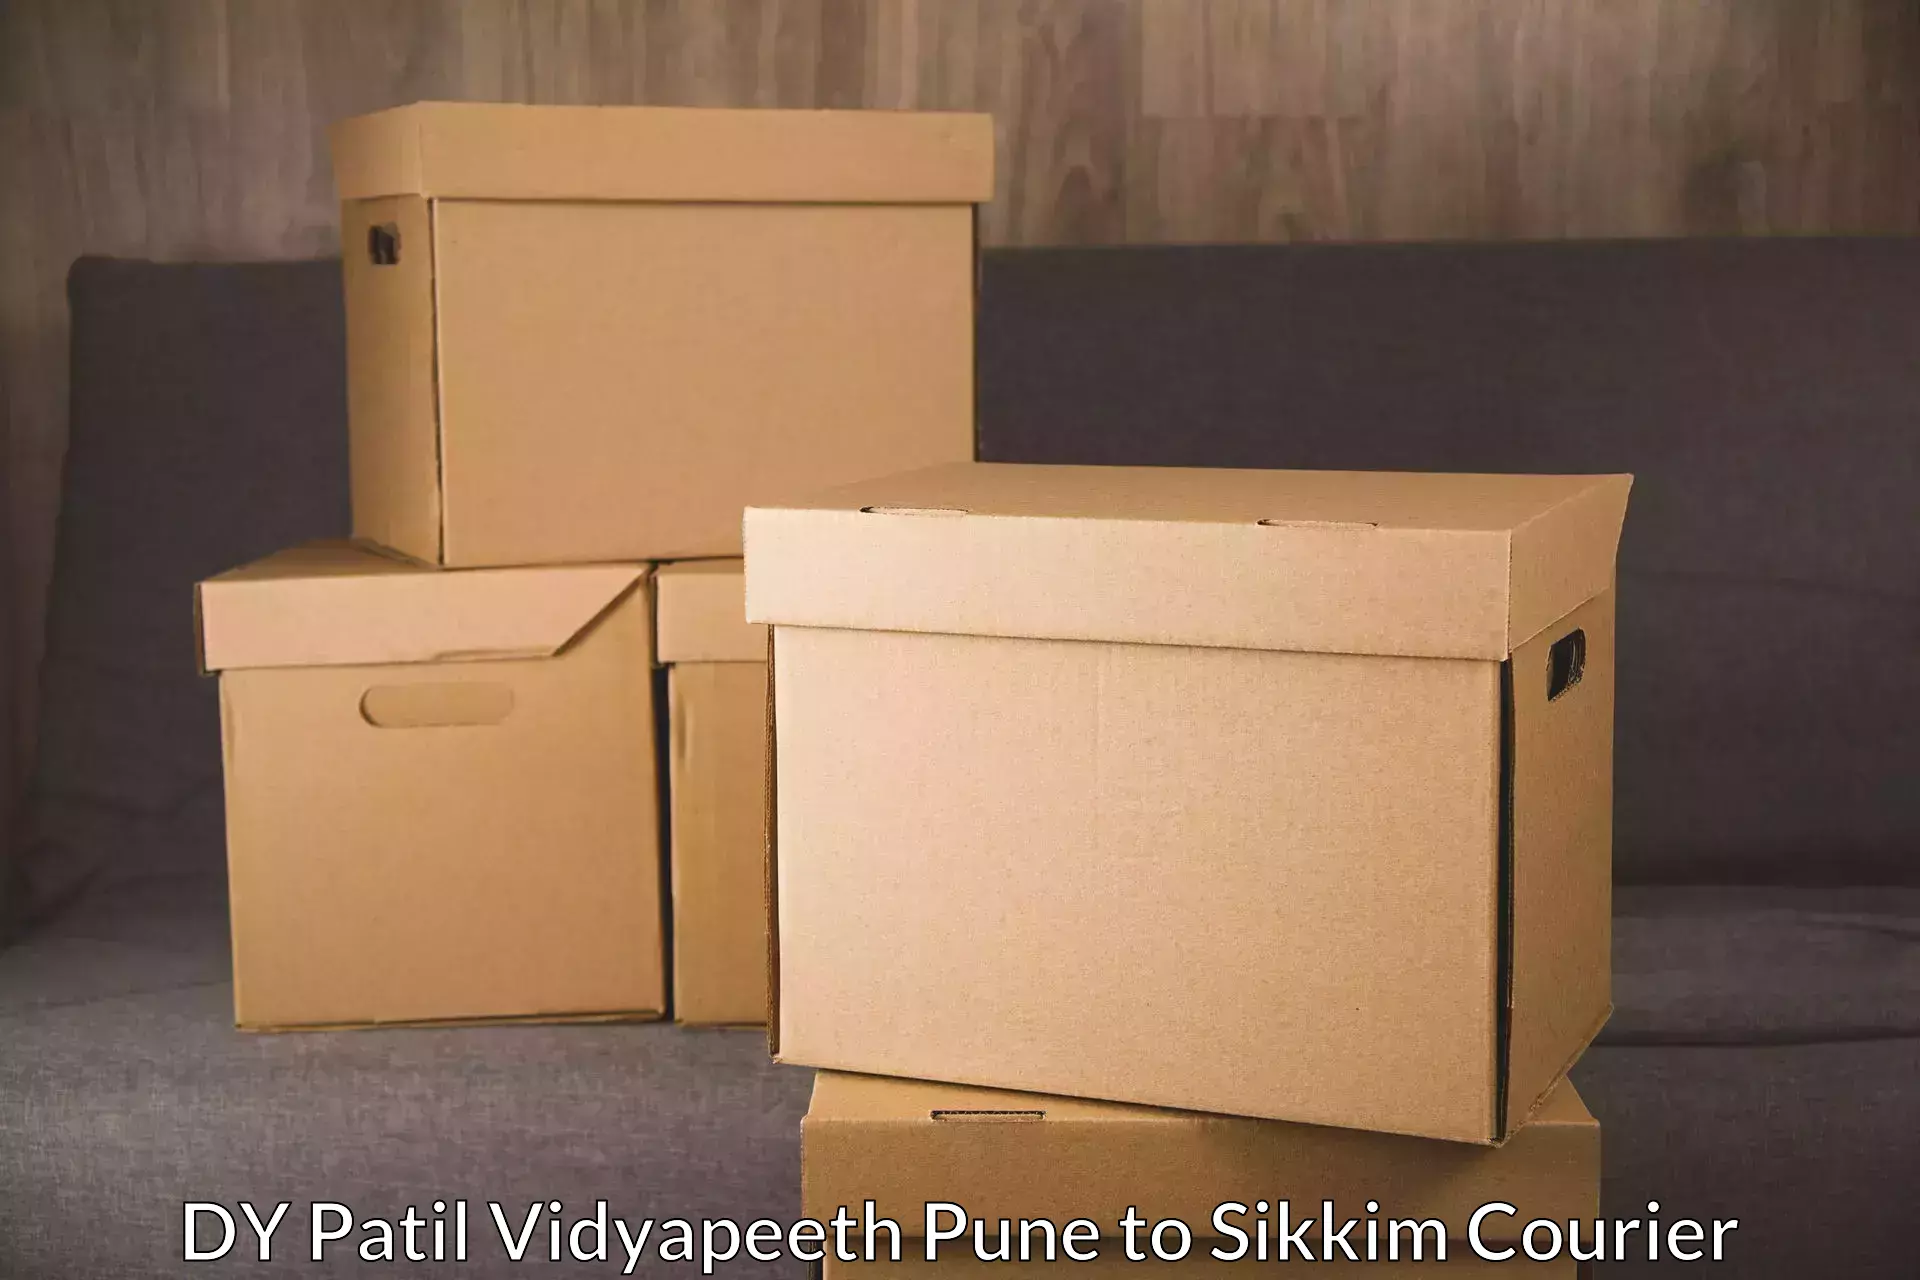 Weekend courier service DY Patil Vidyapeeth Pune to Ranipool